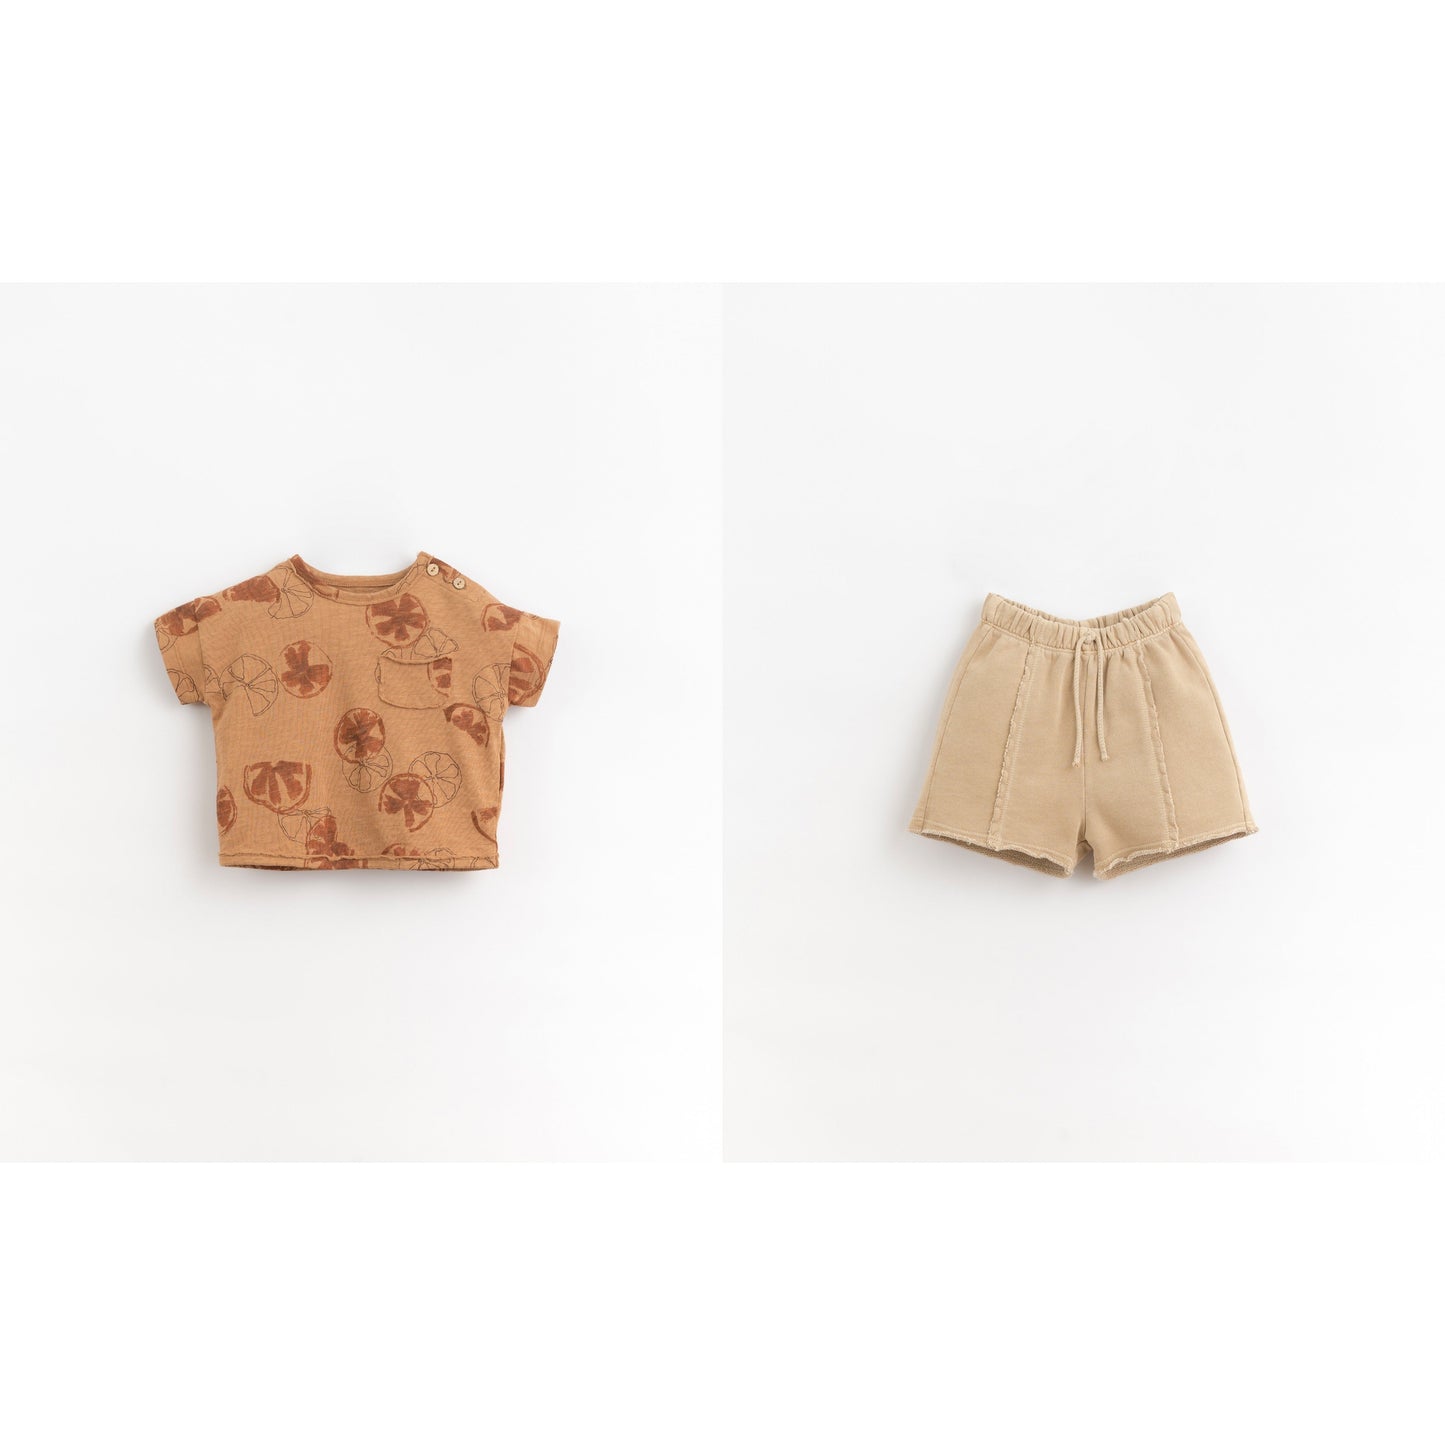 Brown SS tee with citrus print and khaki jersey short